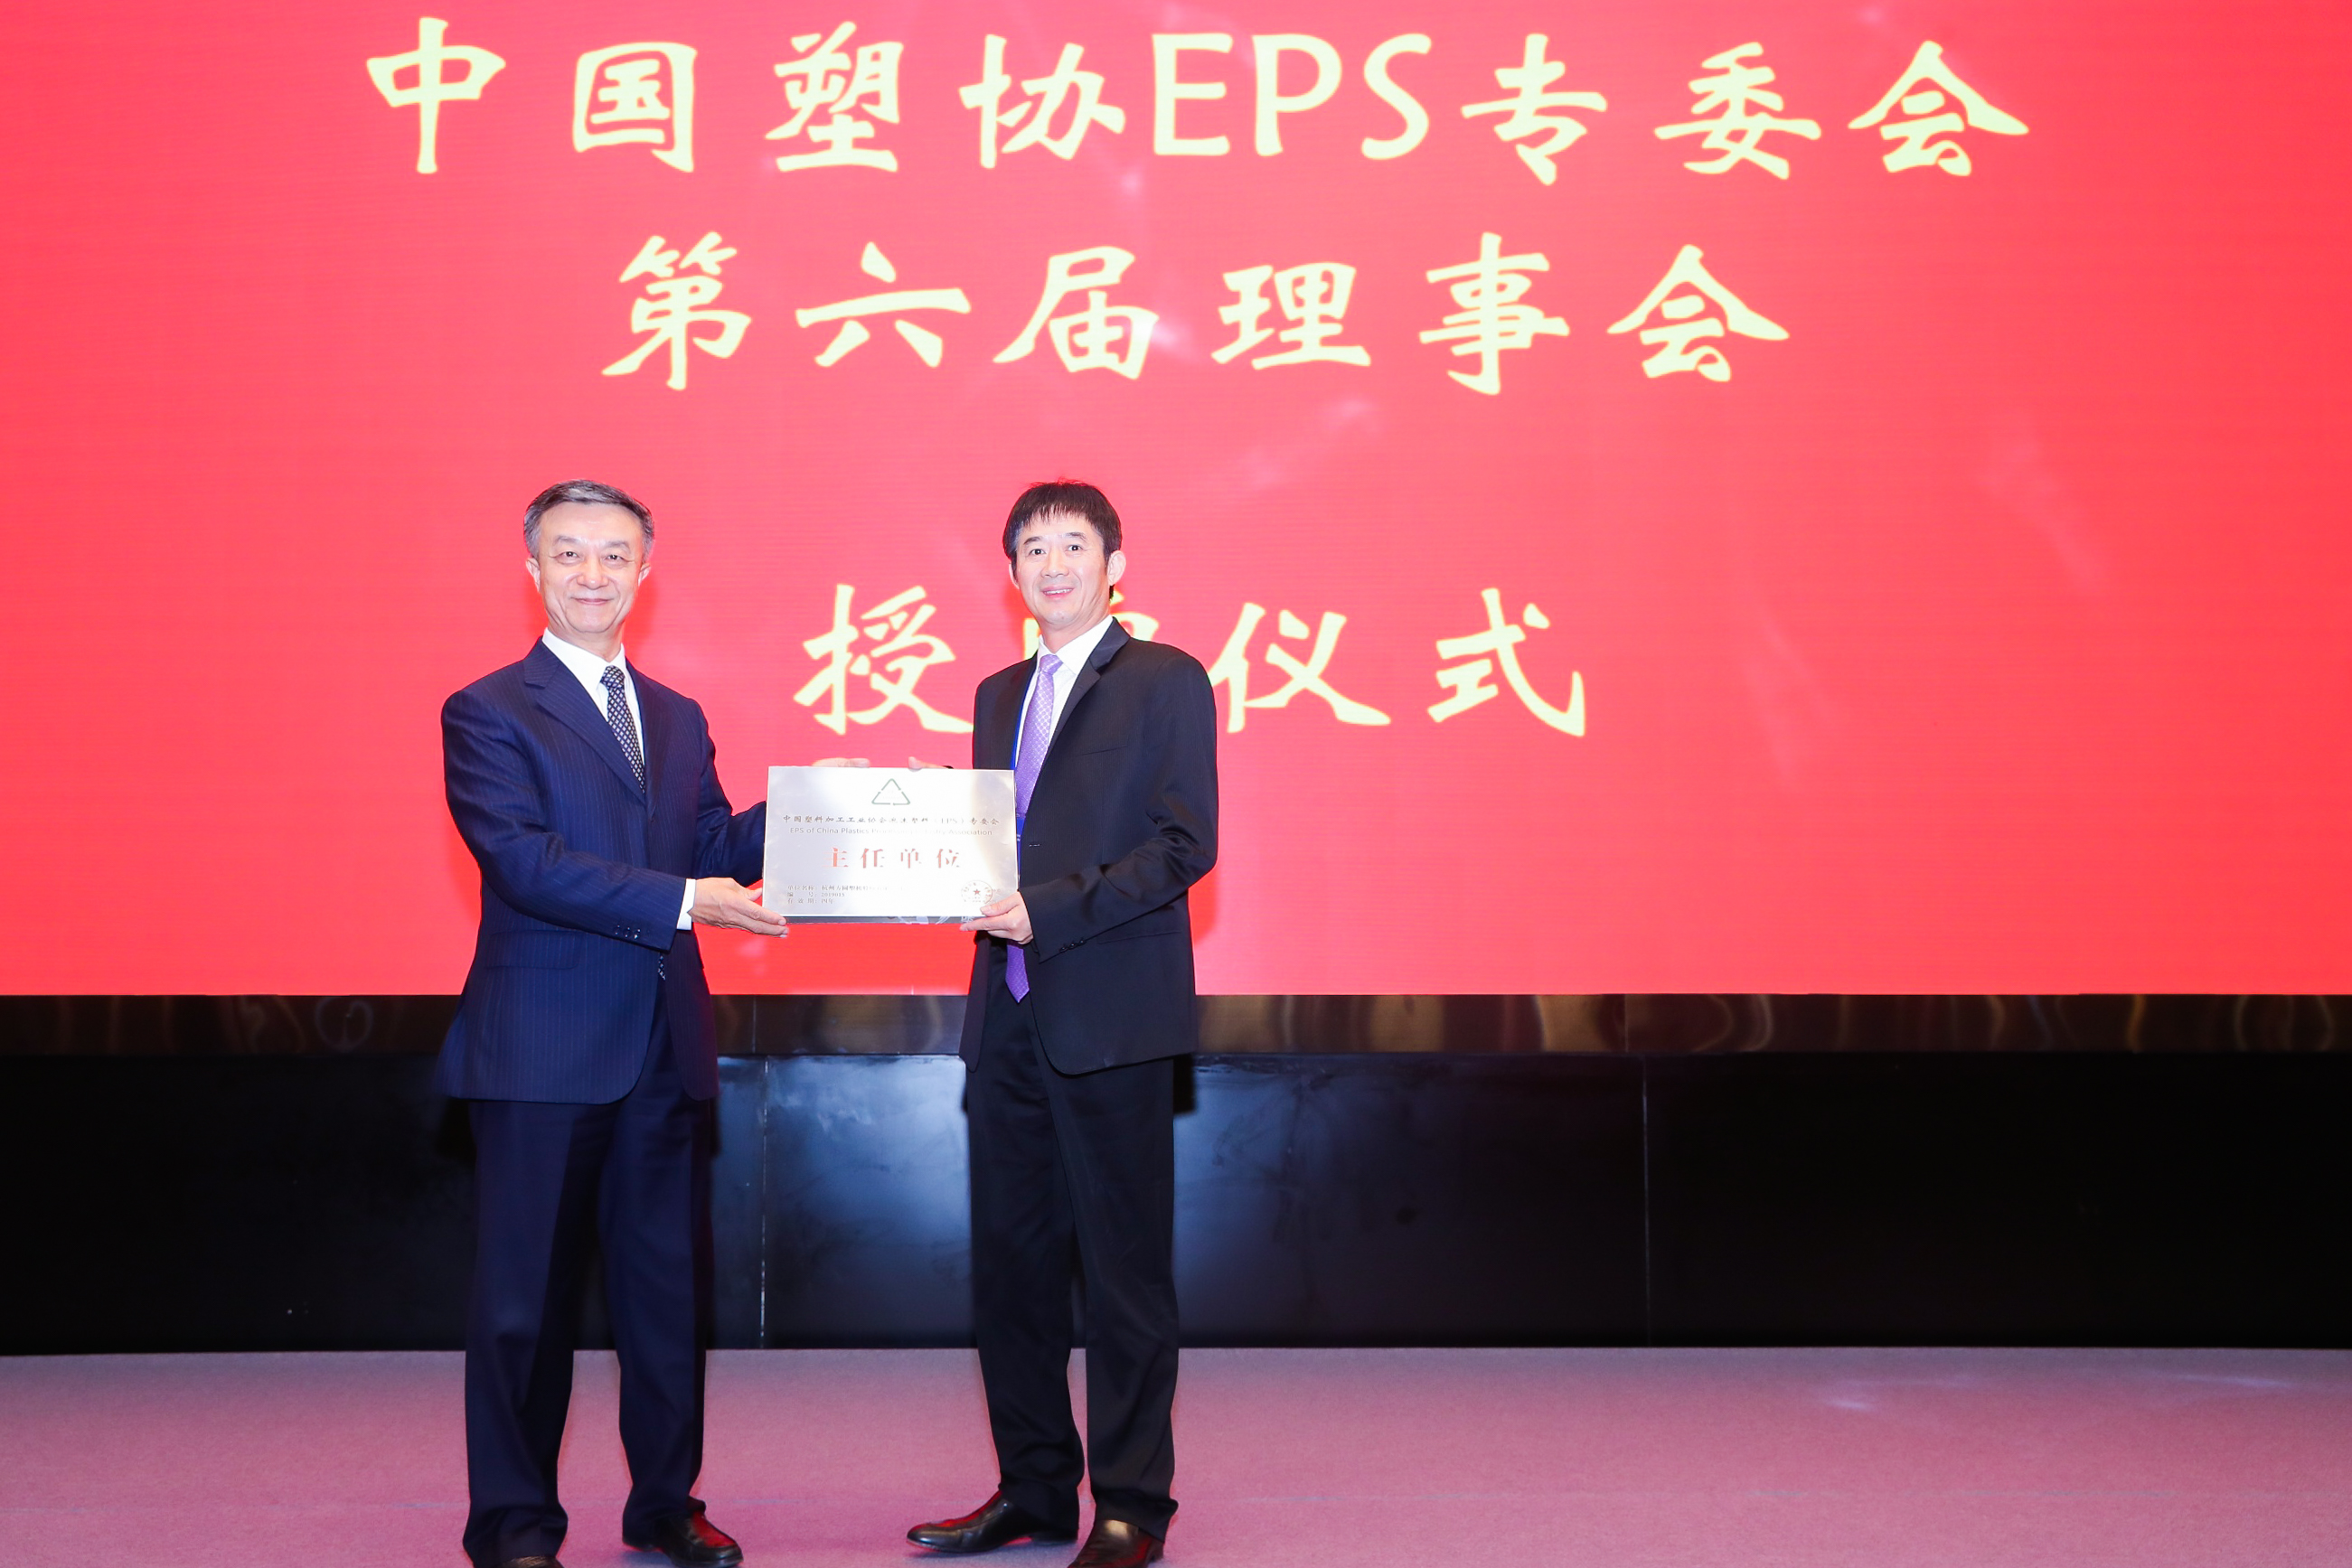 Mr. Yuan Guoqing,The owner of Fangyuan company, is awarded chairman of the EPS Committee of China Plastics Processing Industry Association since 2019.